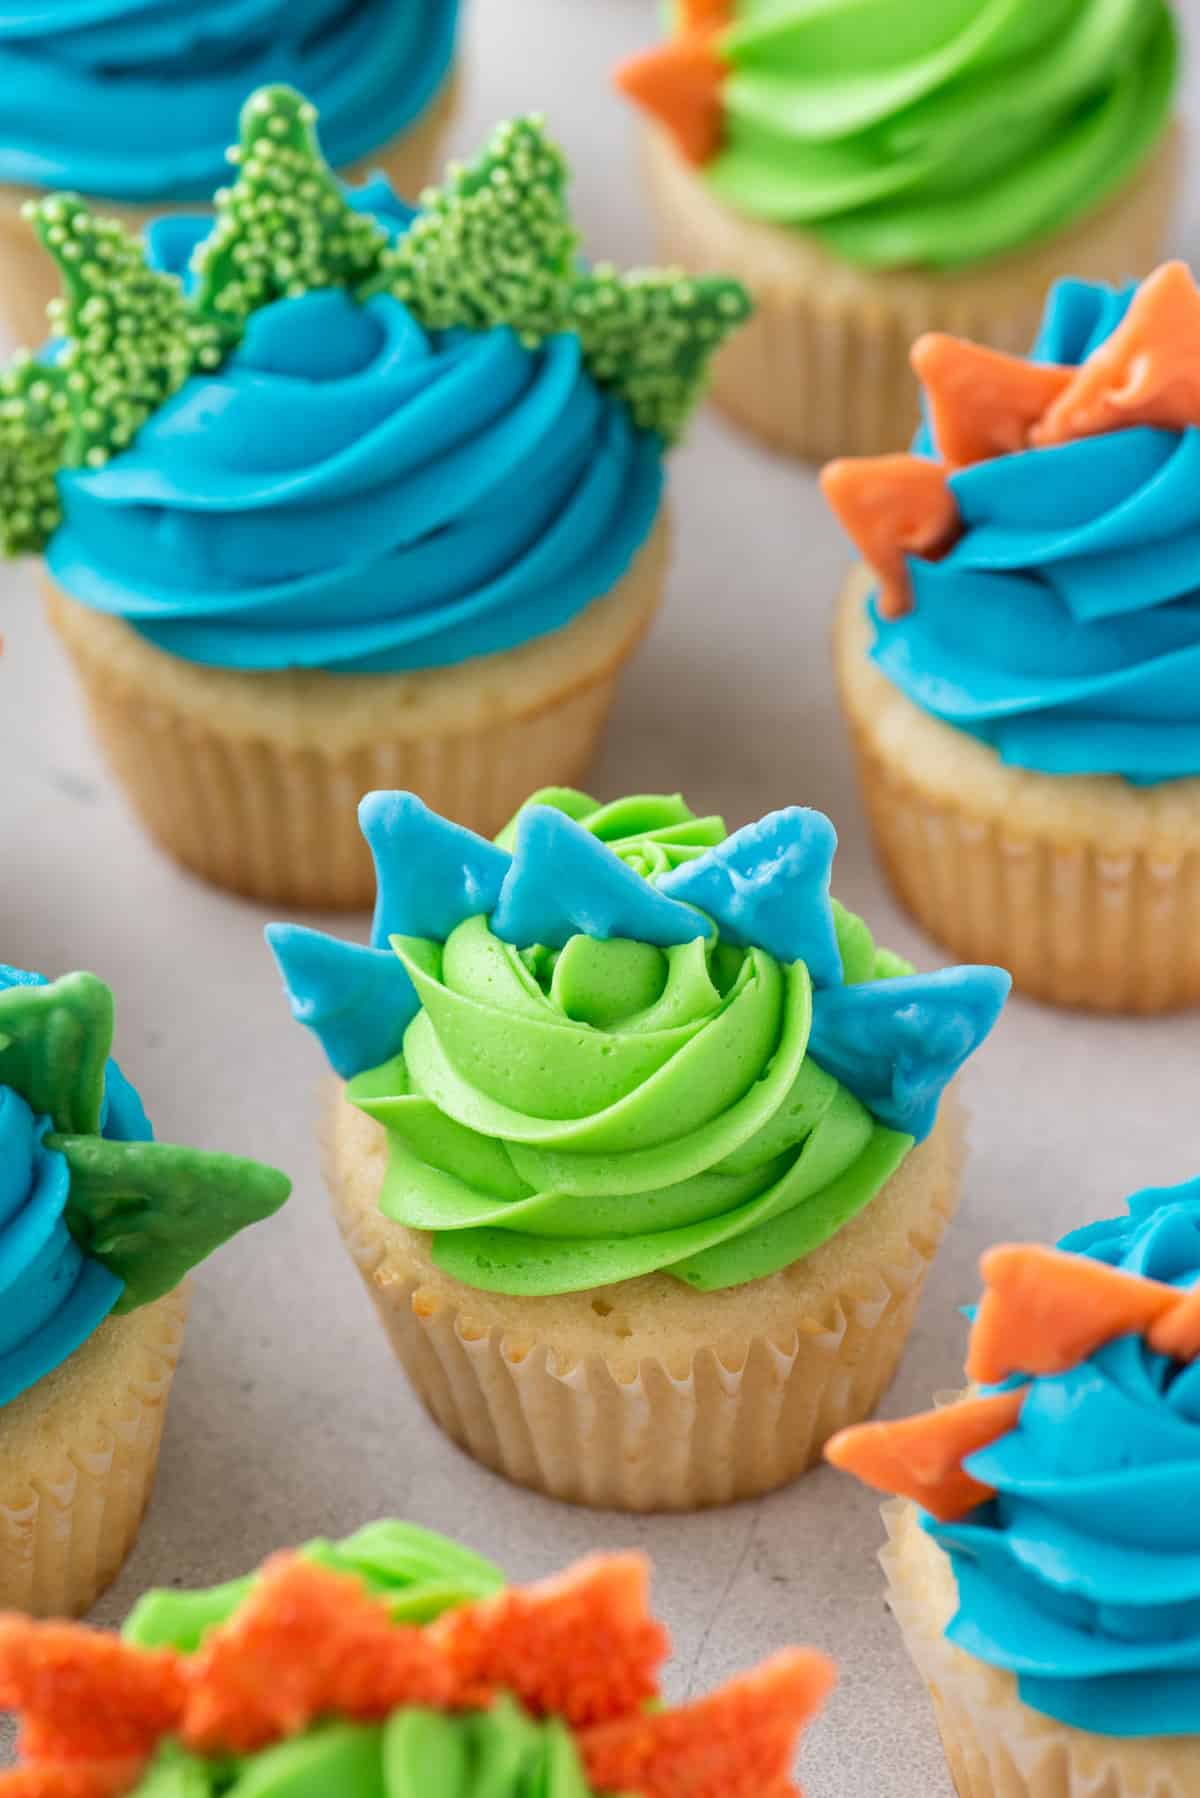 Dinosaur cupcakes with colored frosting and spikes